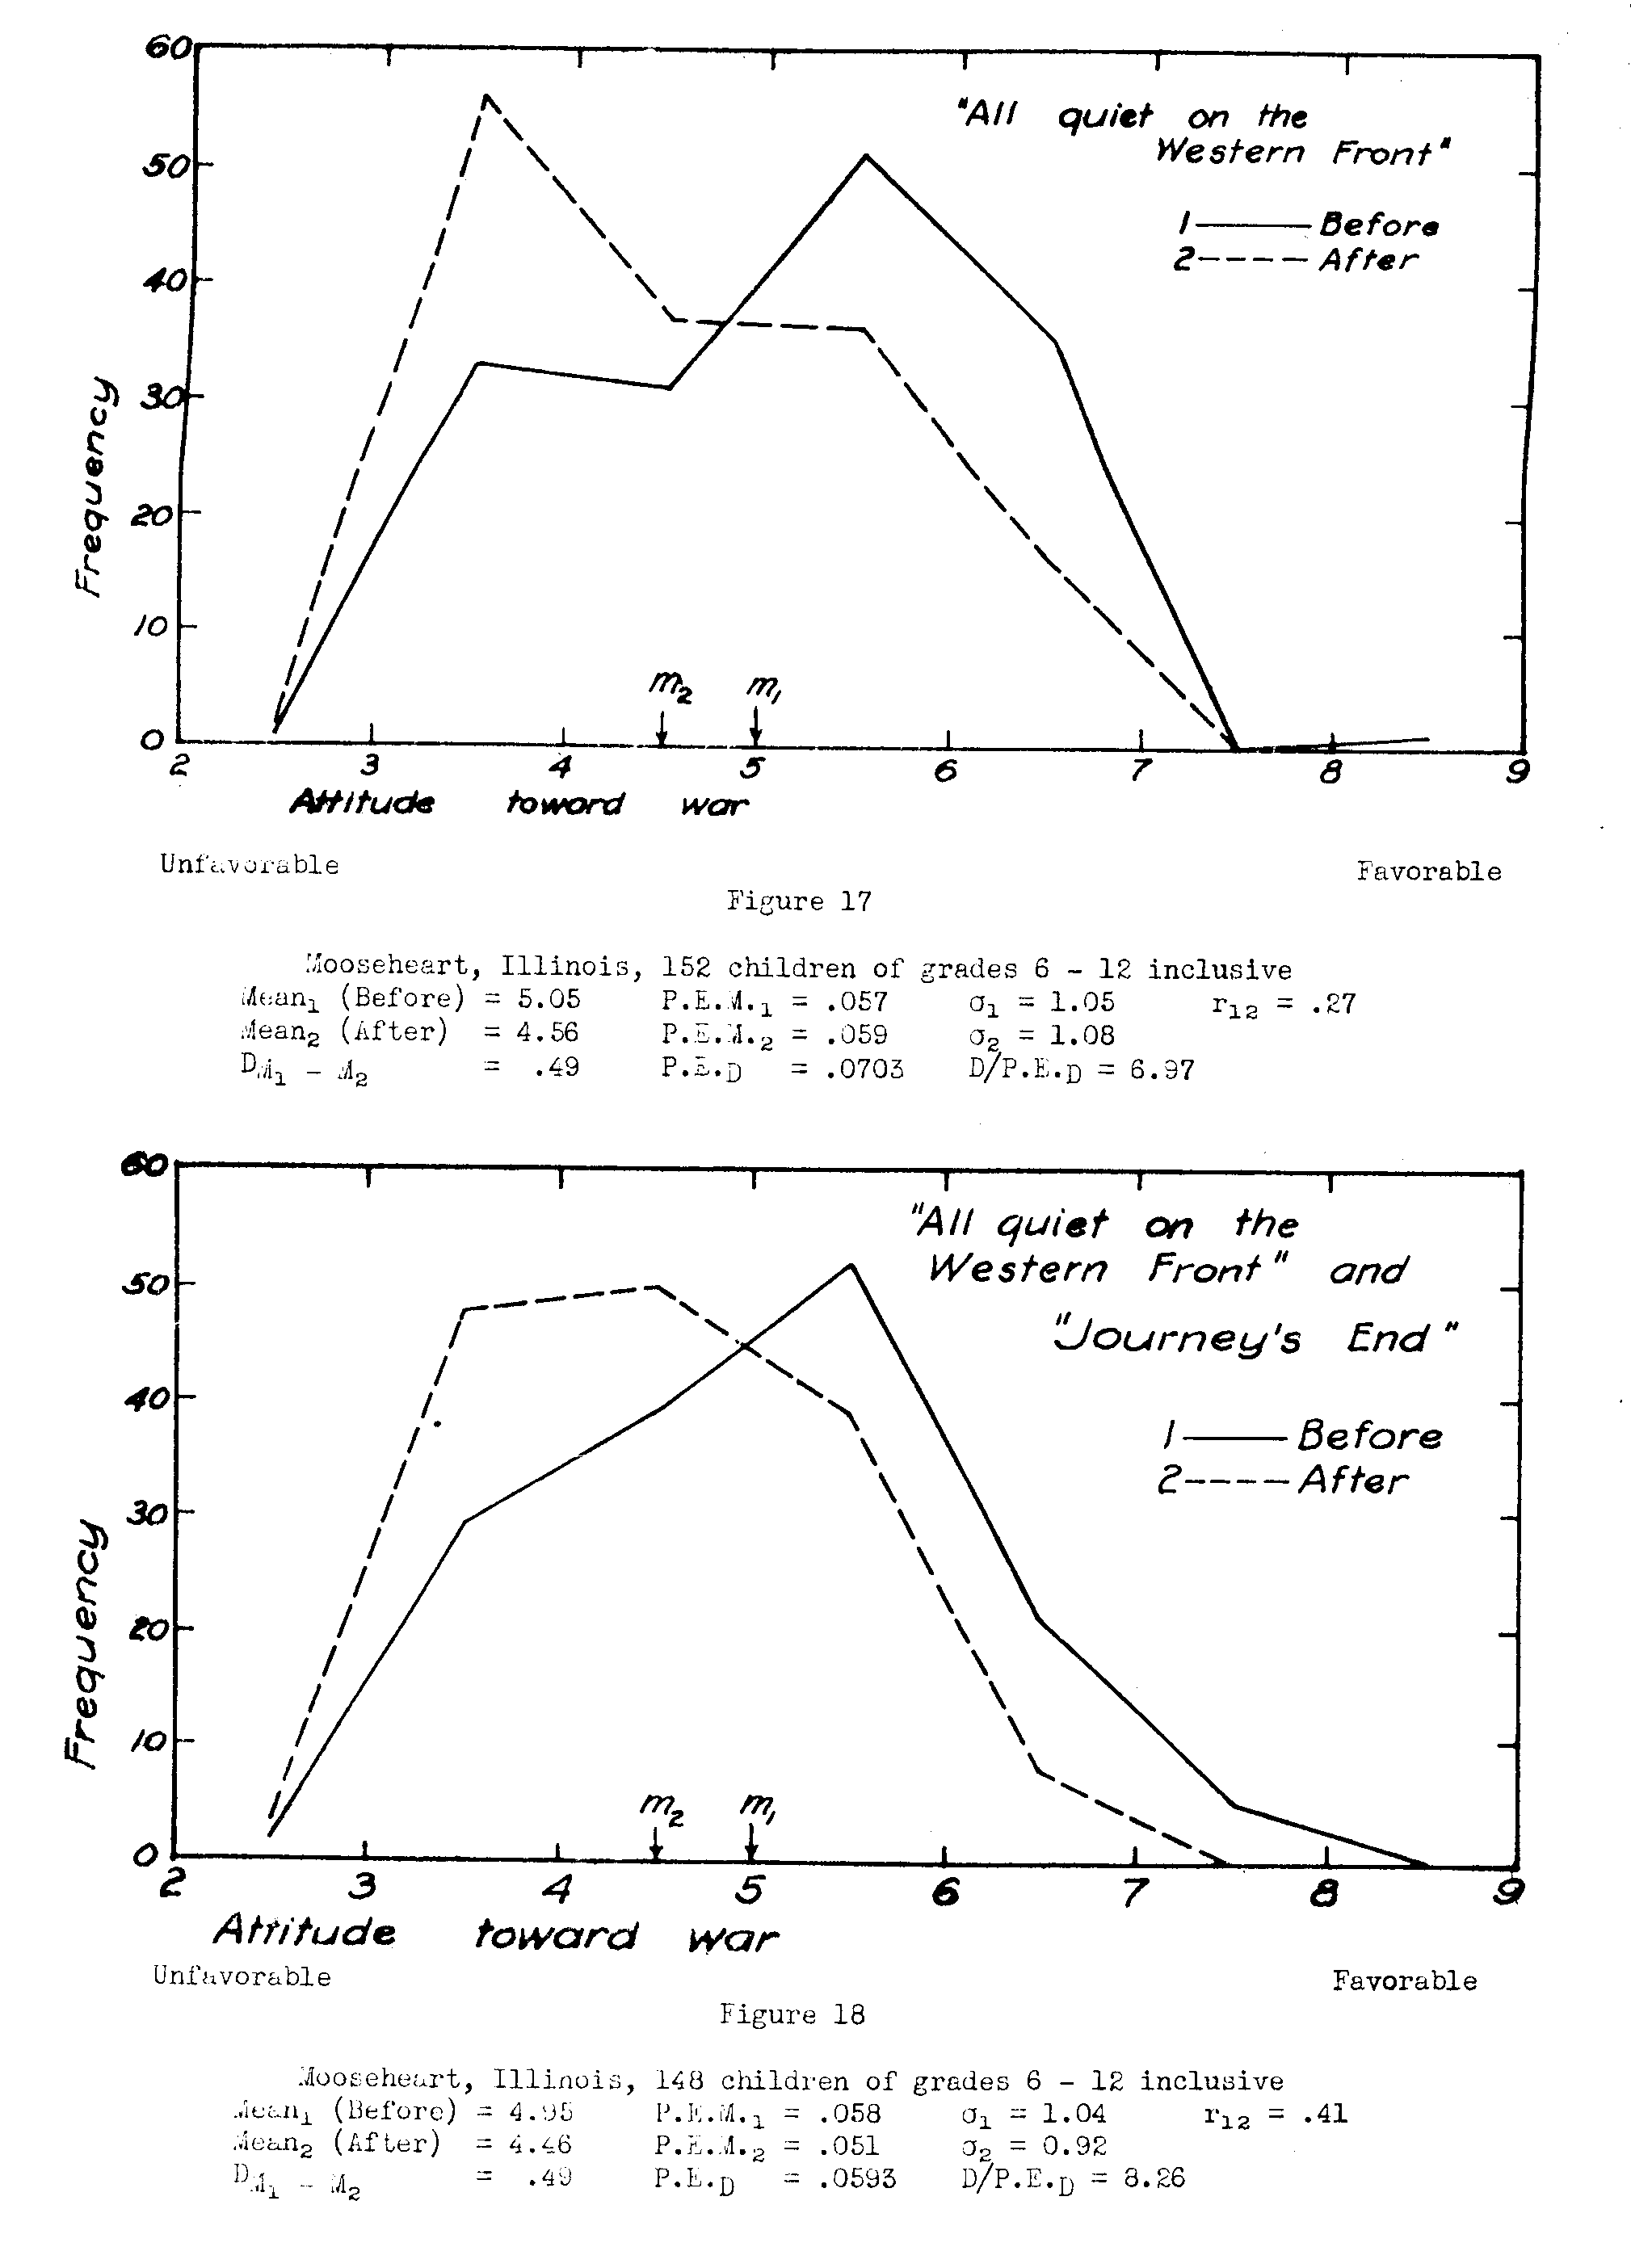 Figure 17, Attitude toward war, before and after ALL QUIET On WESTERN FRONT